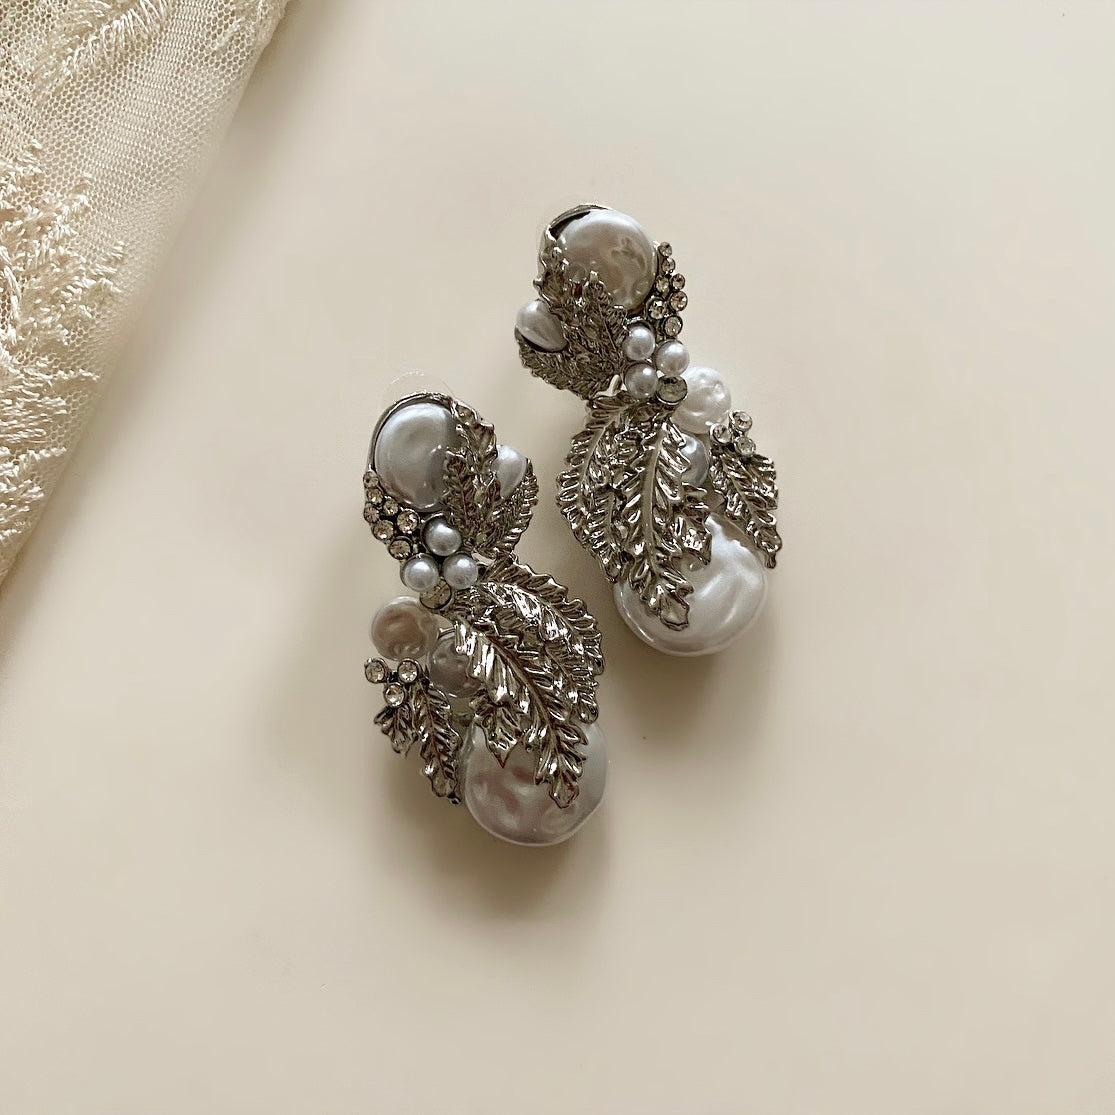 Kate Silver Earrings offer an exquisite and subtle touch of elegance. This timeless design features a combination of pearls, crystals, and silver for an eye-catching, classic look. Perfect for any occasion.  Details: Earring drop 5cm